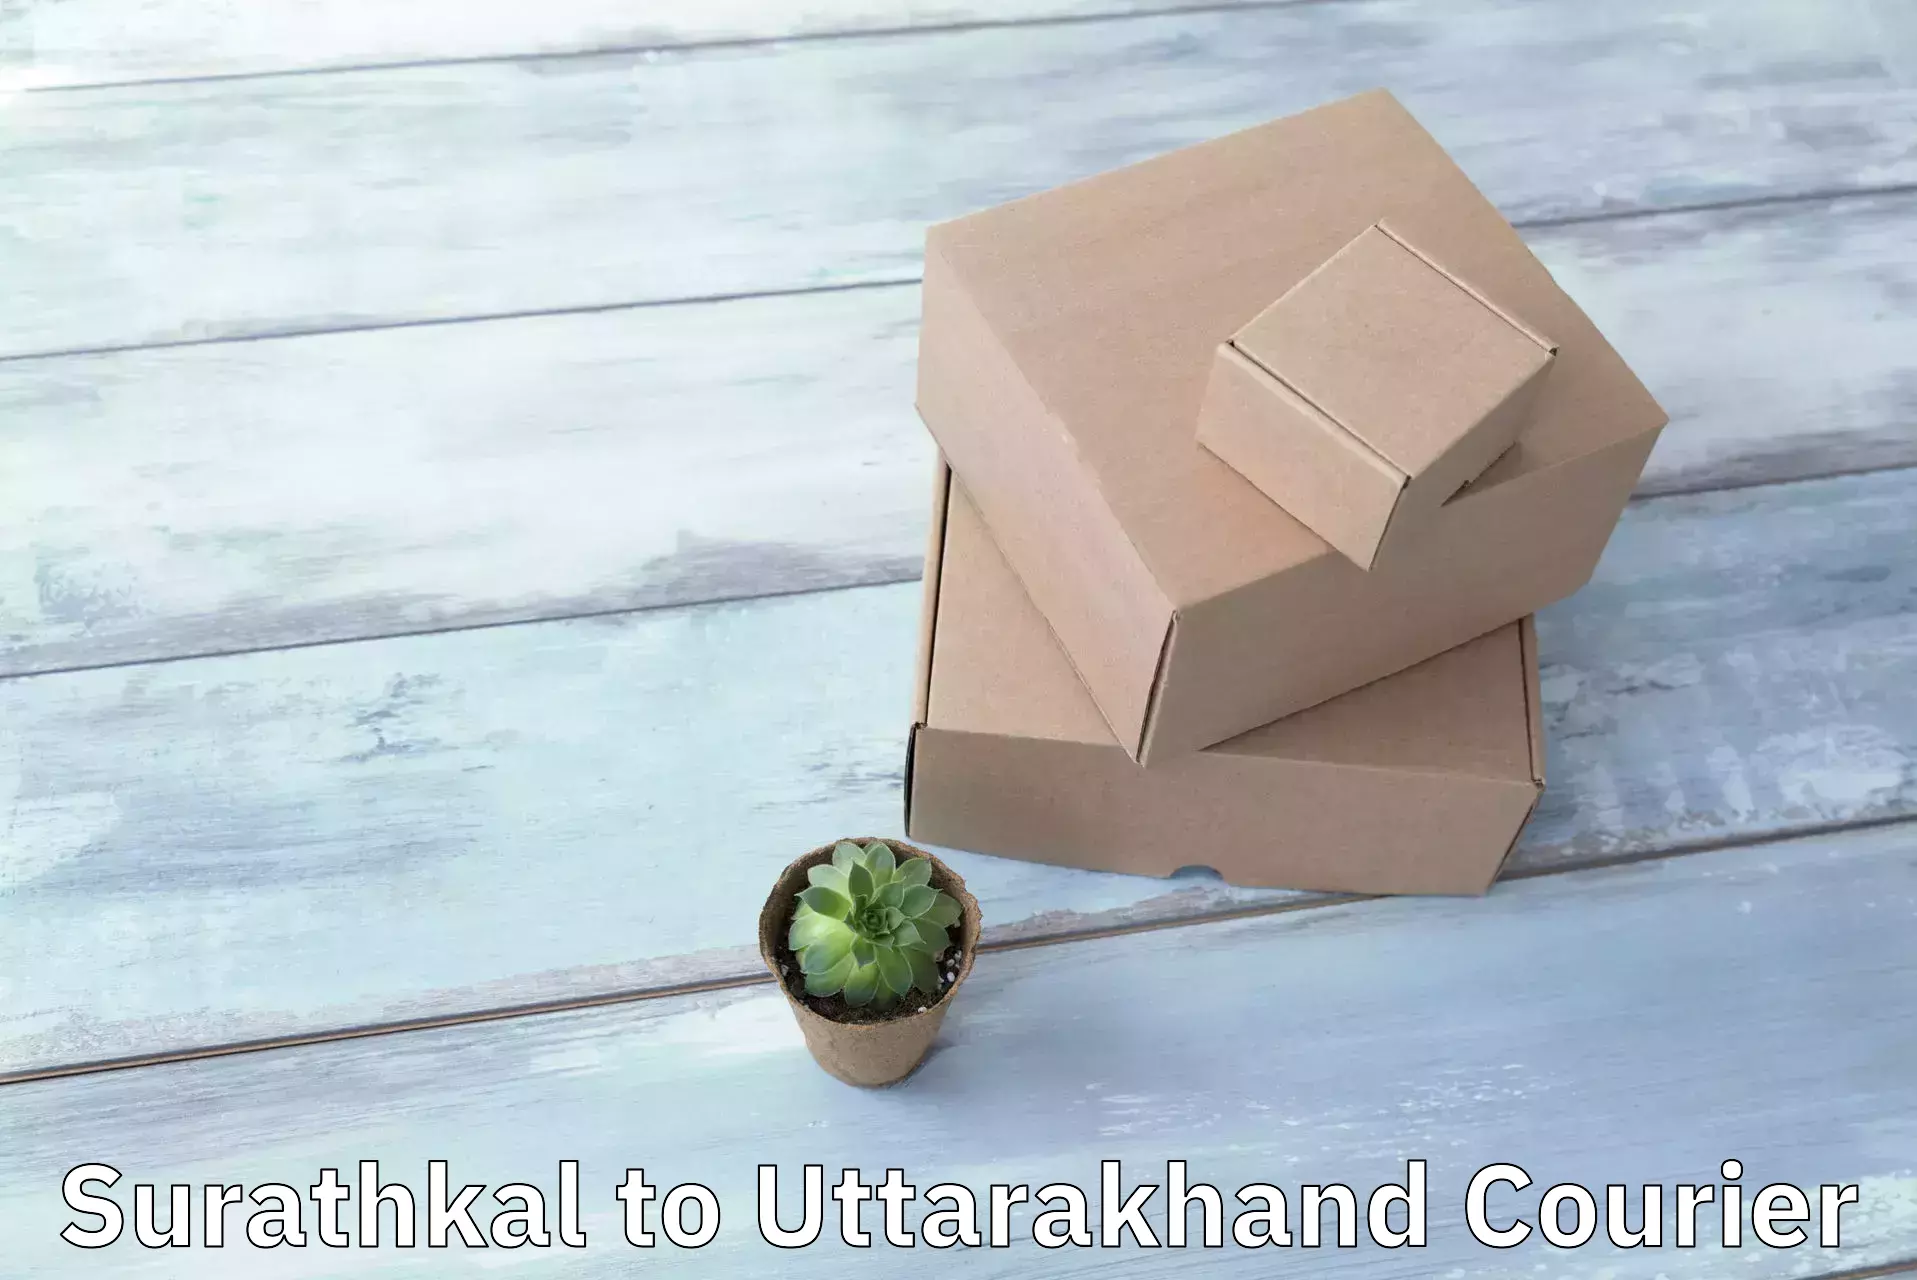 Customizable shipping options Surathkal to Bhimtal